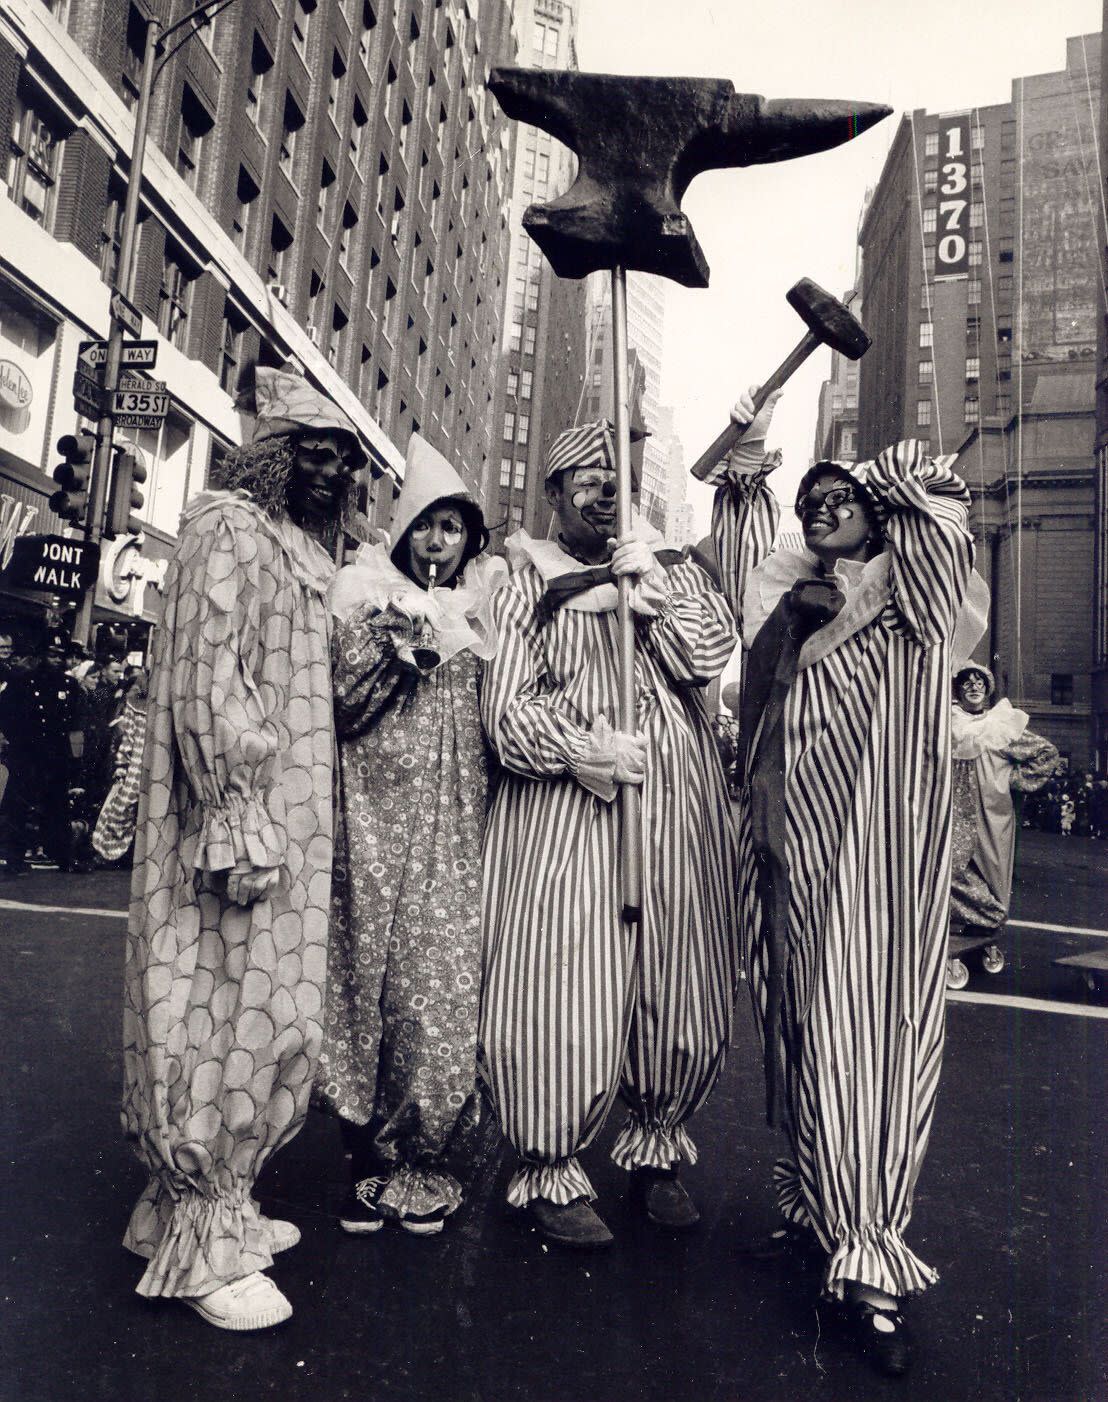 Macy's employees dressed as clowns, a tradition that has persisted to the present day